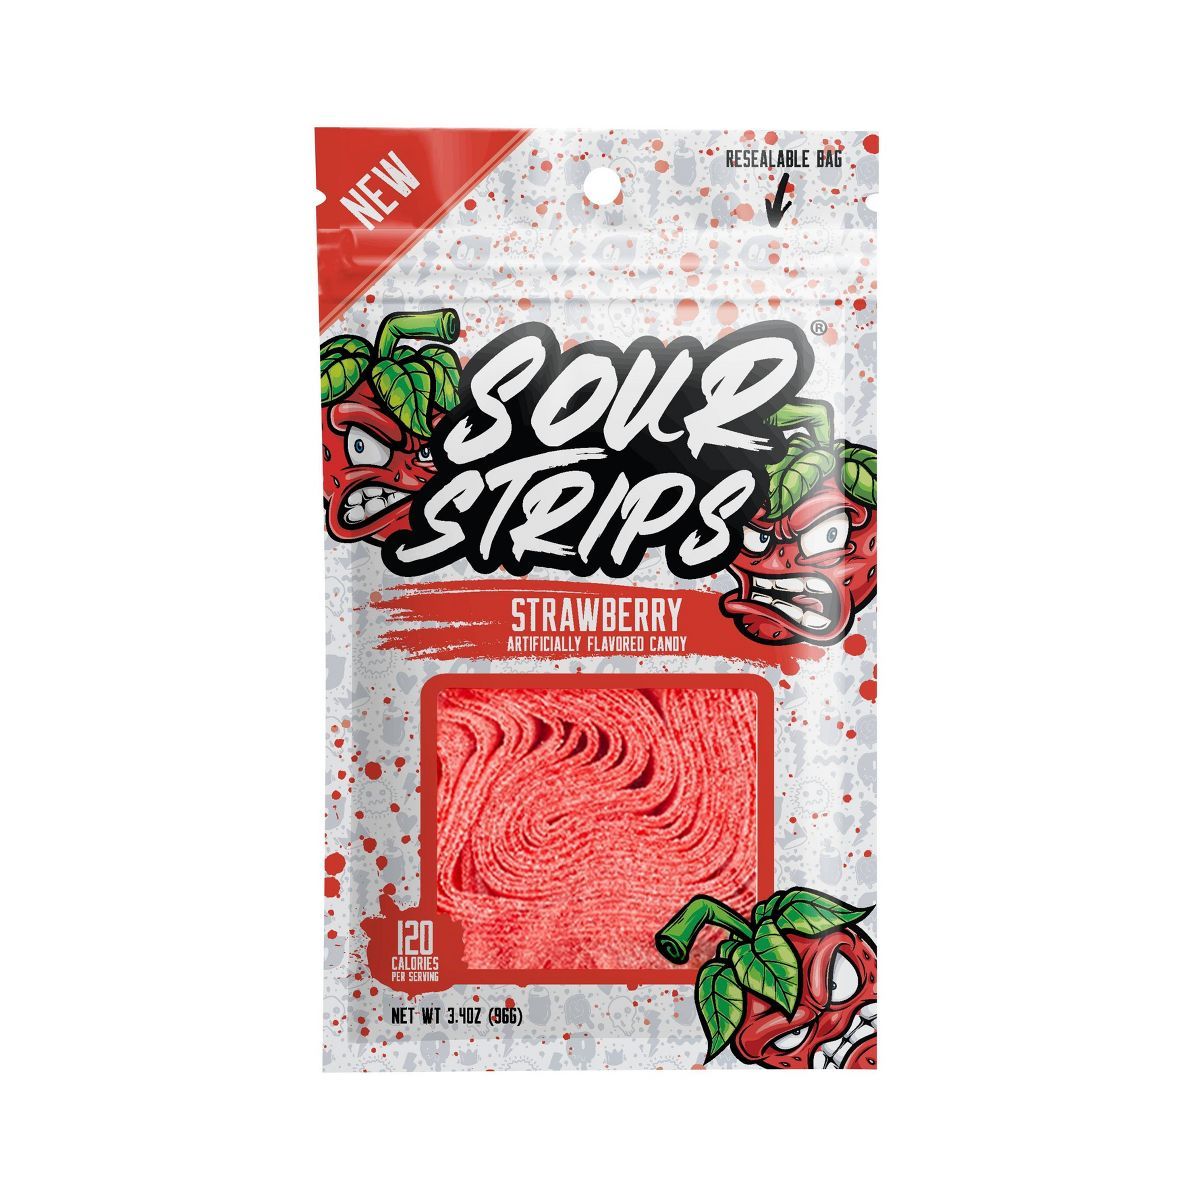 Strawberry Sour Strips Candy - 3.4oz | Target